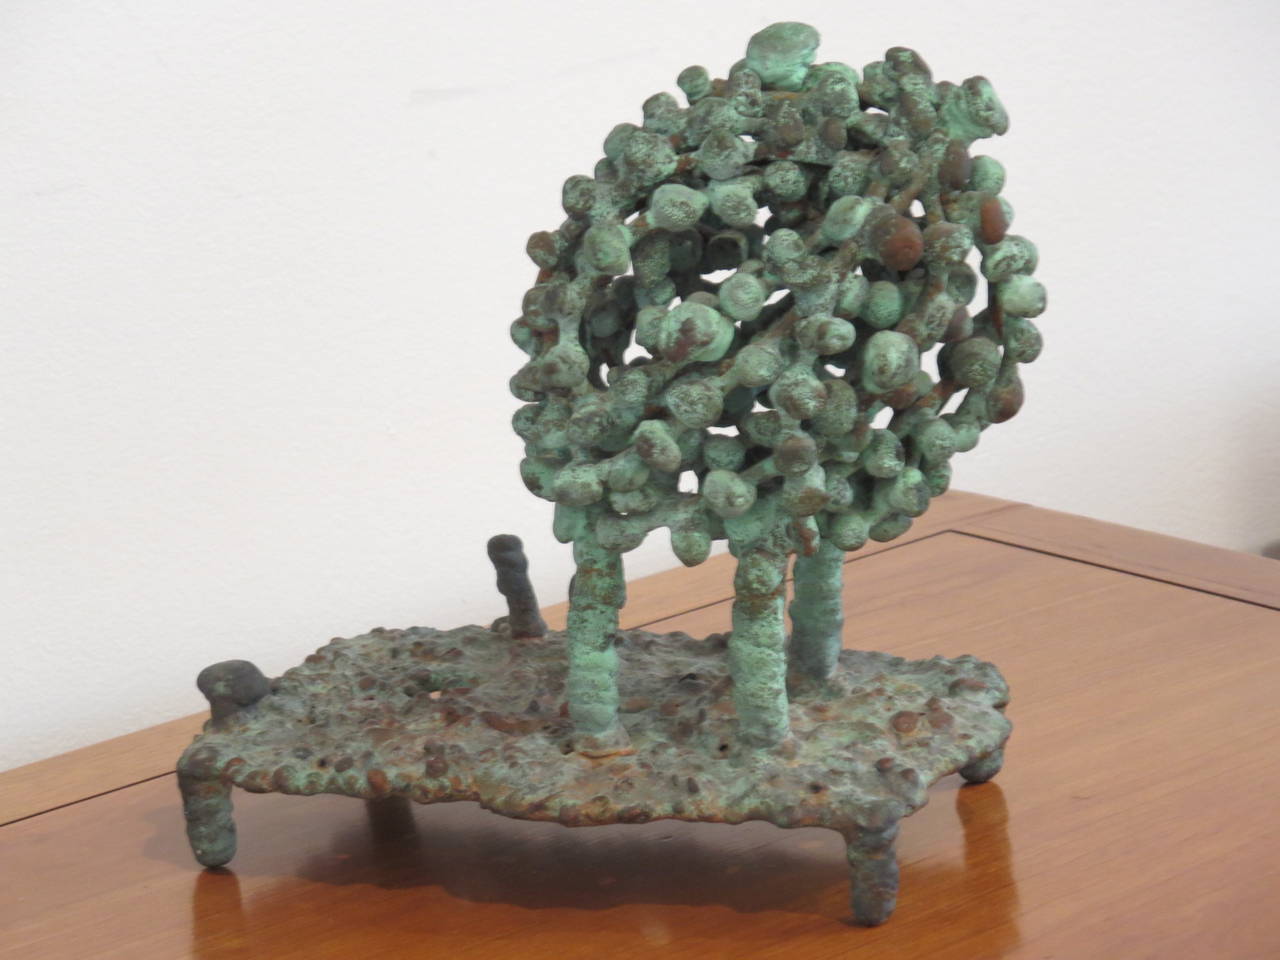 Klaus Ihlenfeld, was a studio assistant to Harry Bertoia, greatly influencing his assistant. Ihlenfeld worked in patinated bronze and produced a series of abstract plant motif sculptures. This bronze sculpture is from the 1970s and was purchased